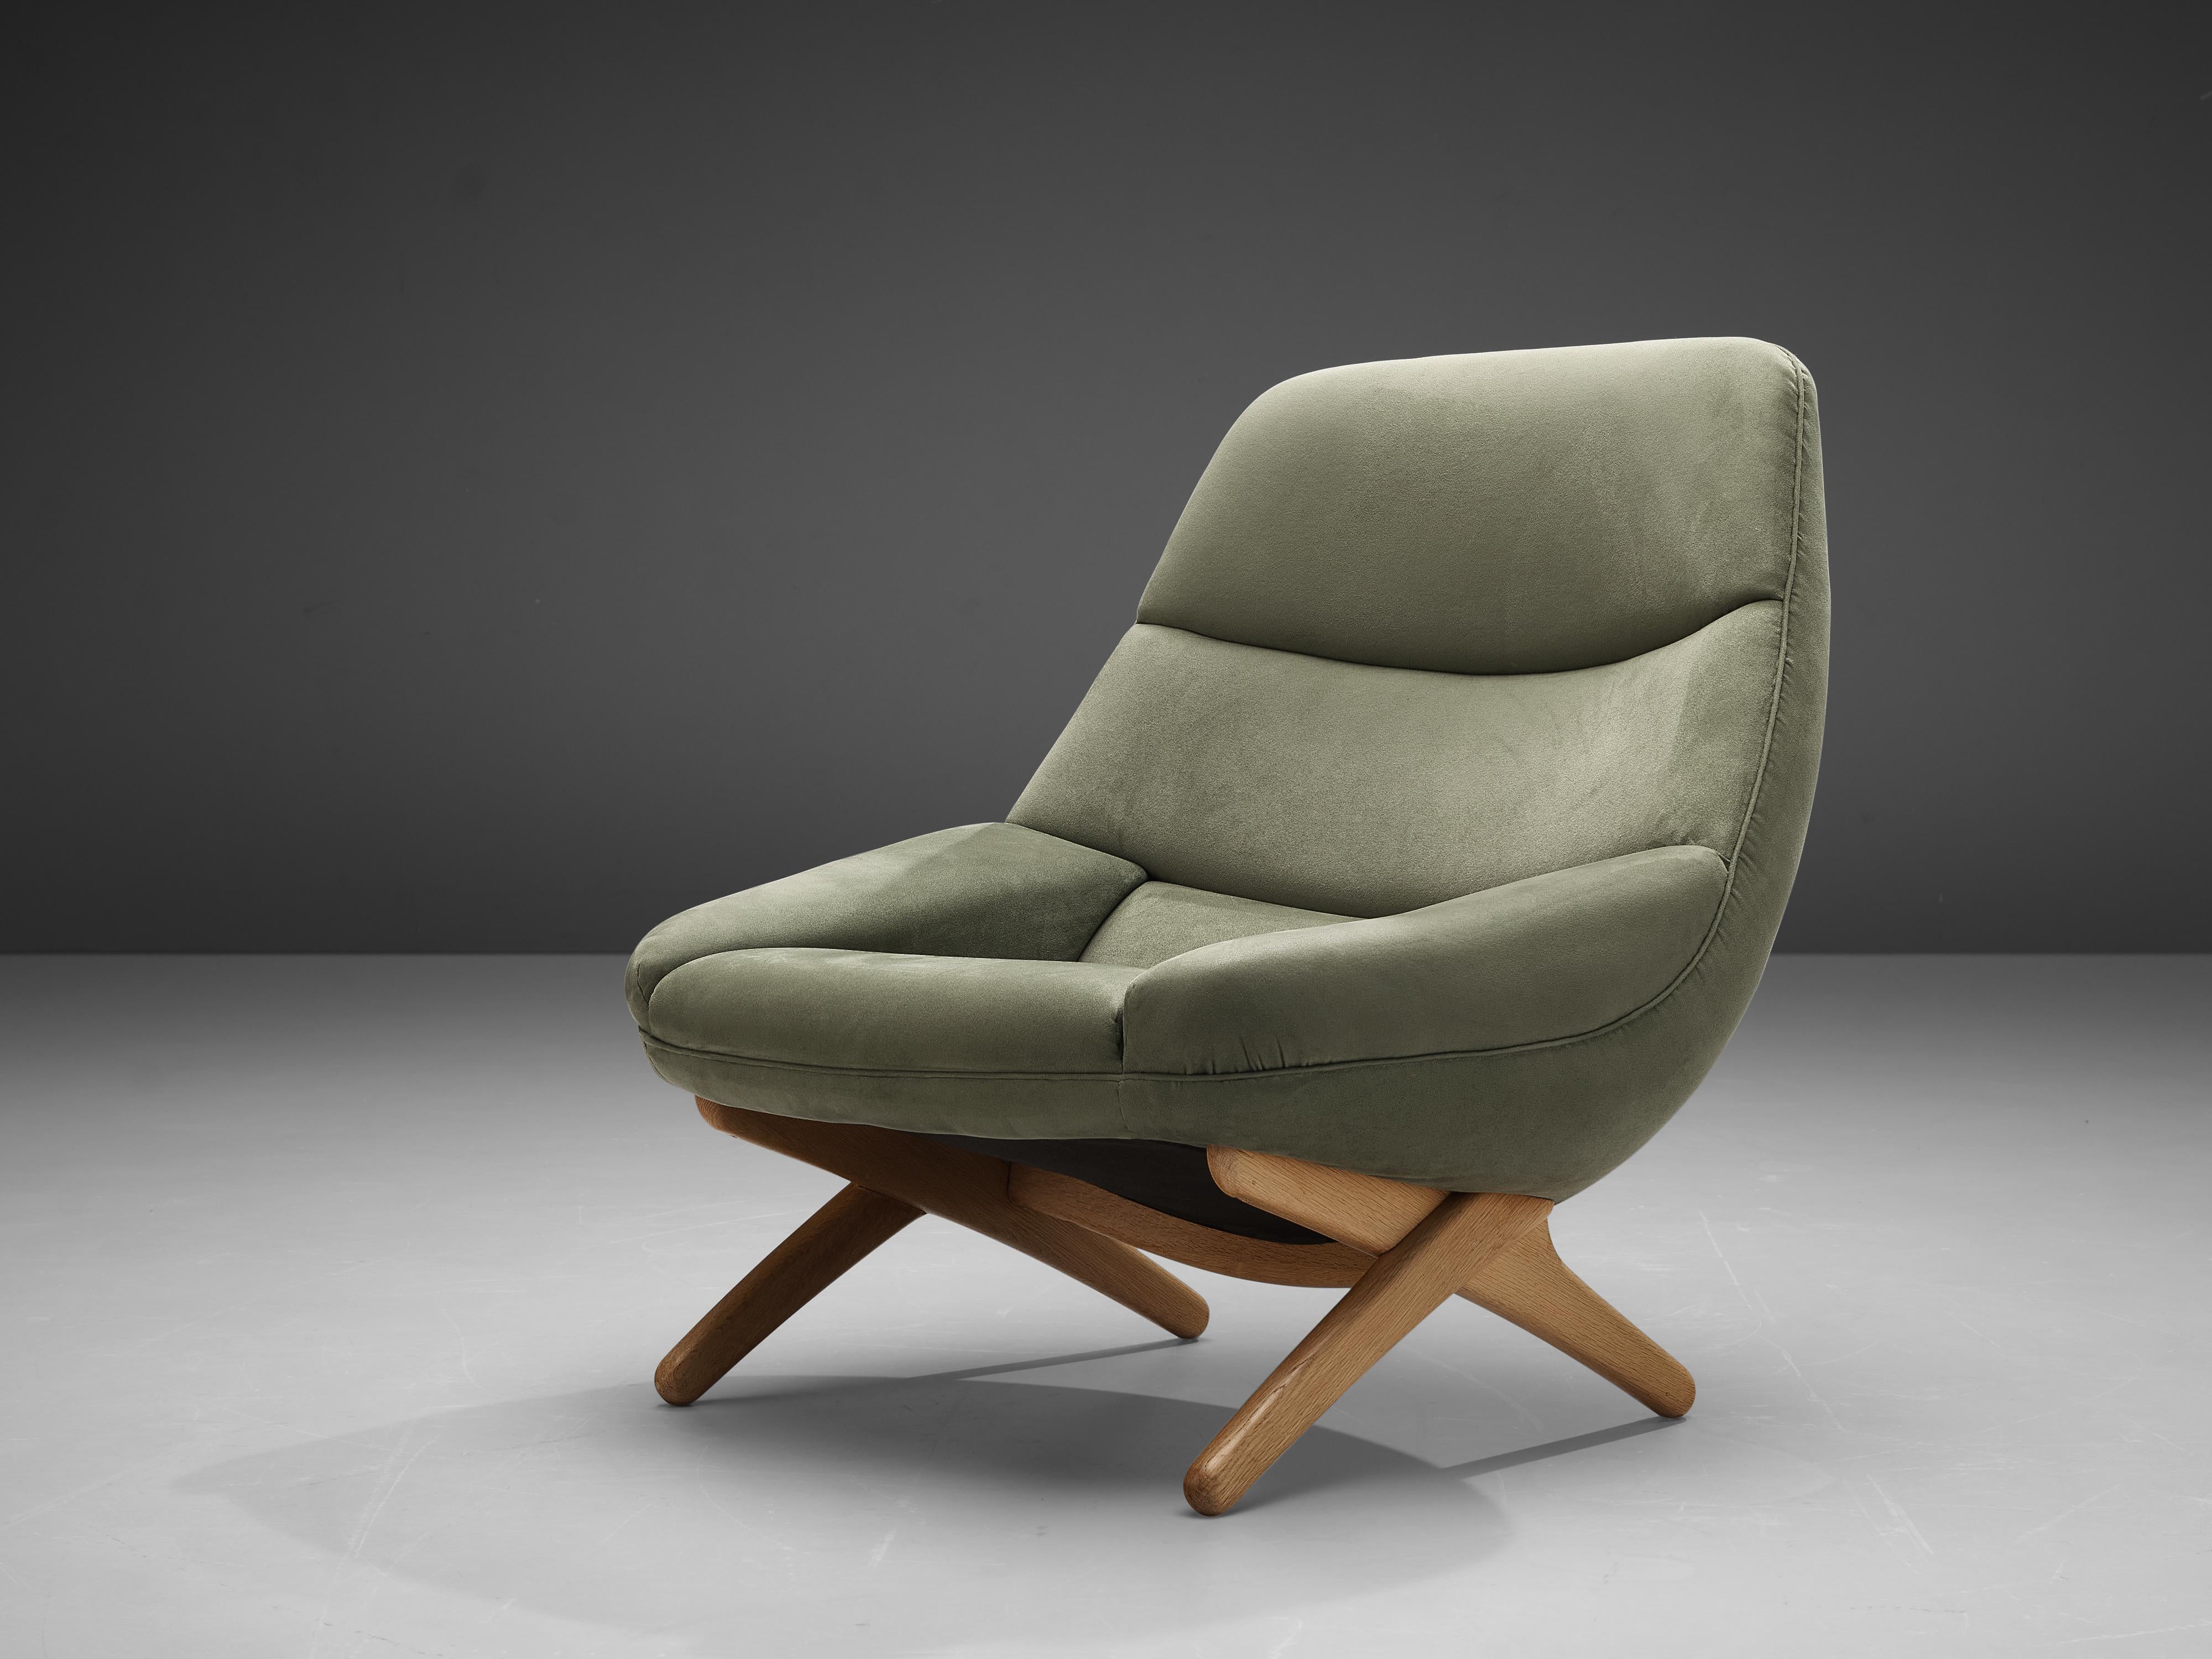 Illum Wikkelsø A. Mikael Laursen, lounge chair model ML91, original fabric, wood, Denmark, 1950s

Comfortable lounge chair by Danish designer Illum Wikkelsø. Currently upholstered in a soft green velour upholstery that enhances the round shape of